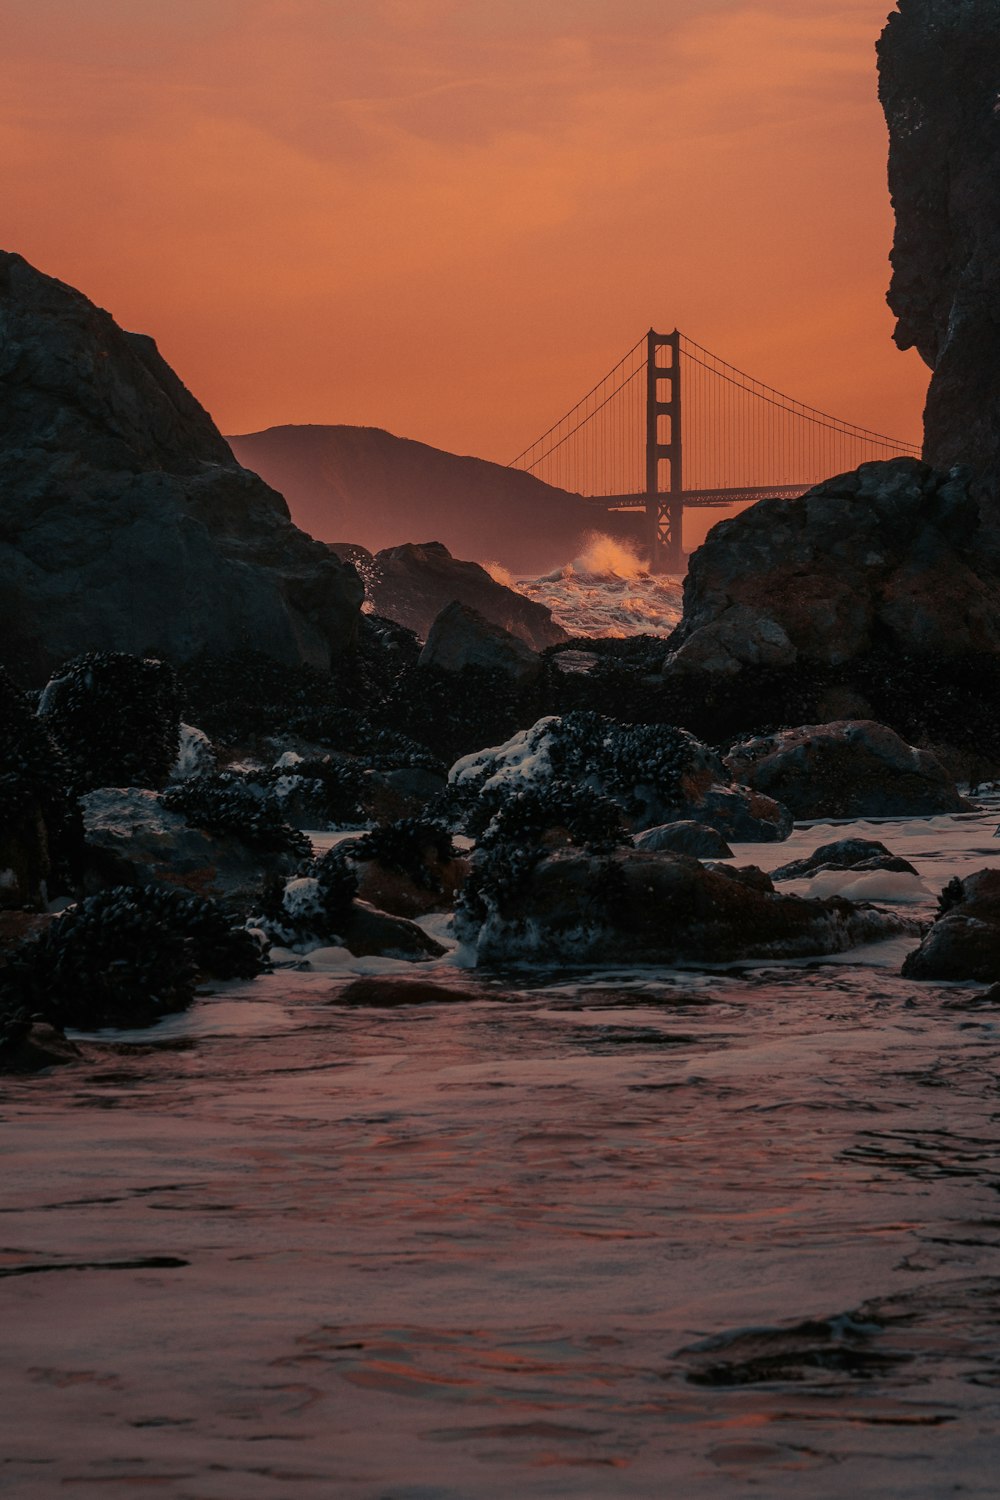 a view of the golden gate bridge at sunset